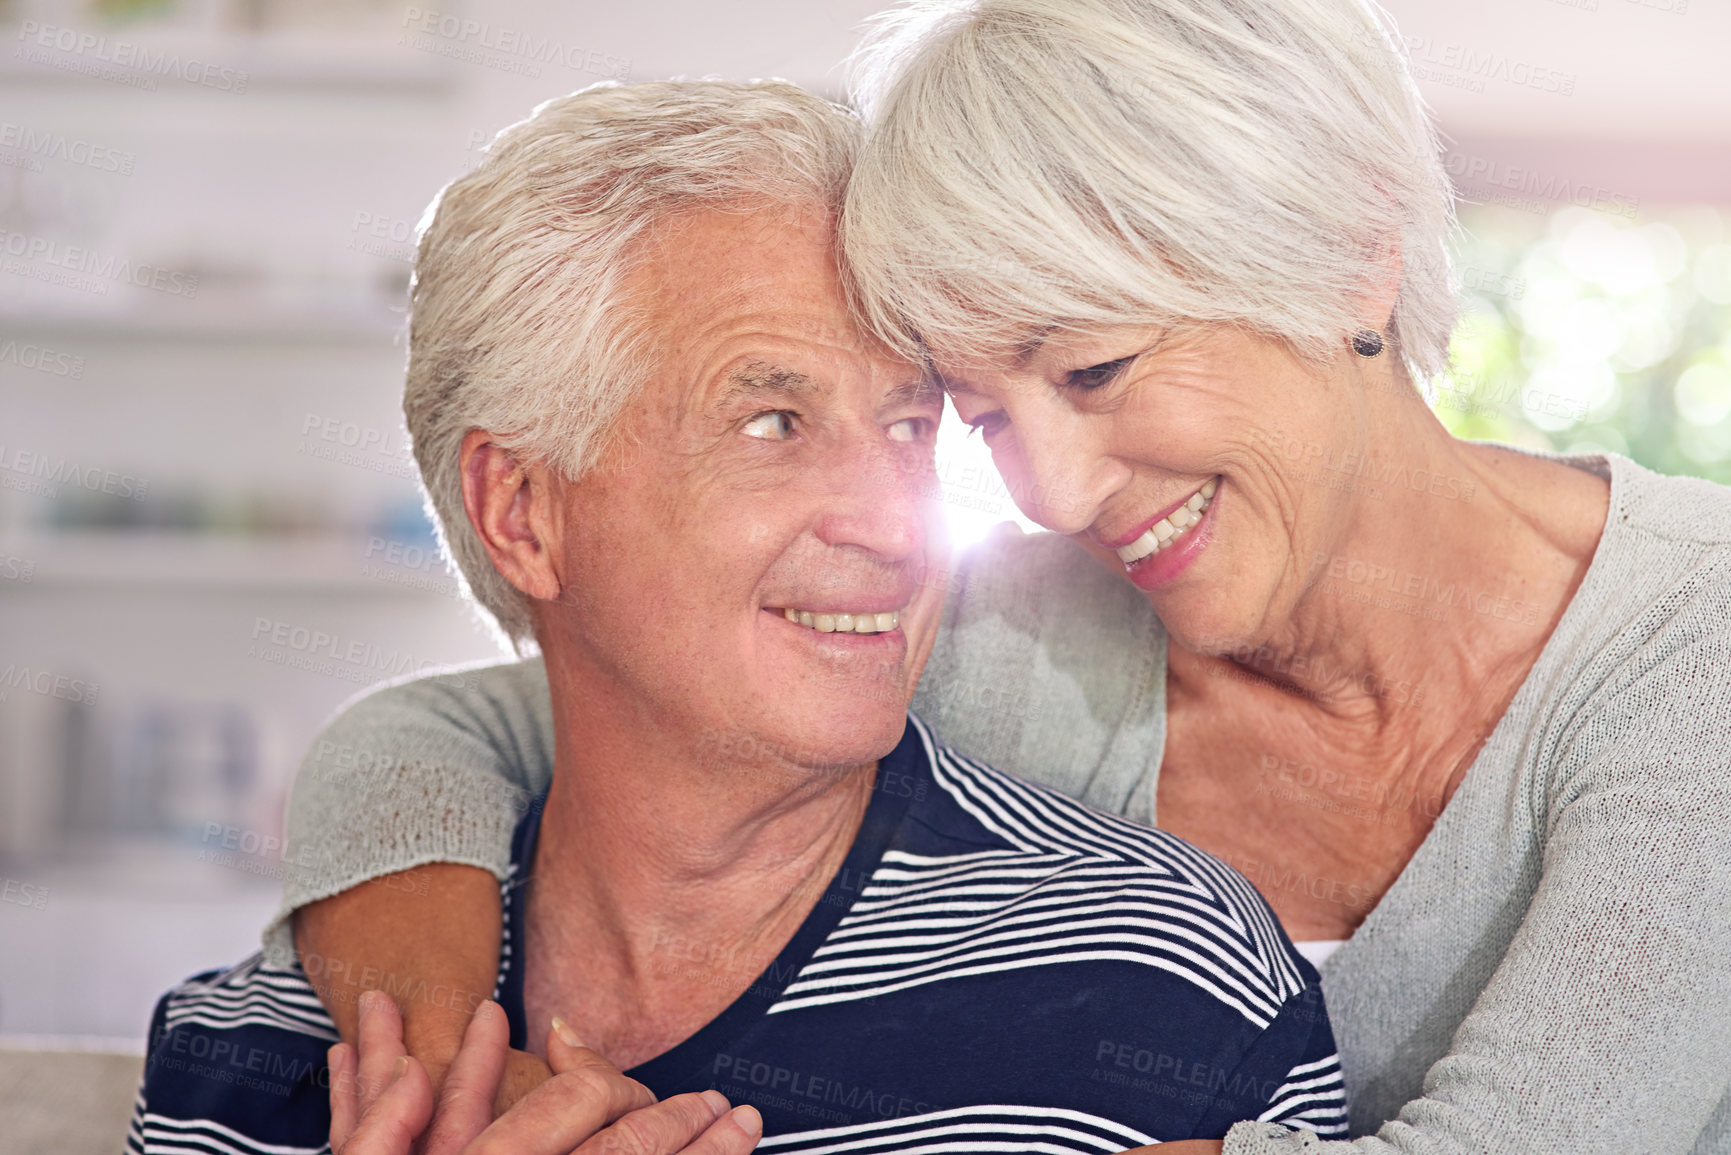 Buy stock photo Shot of a happy senior couple at home